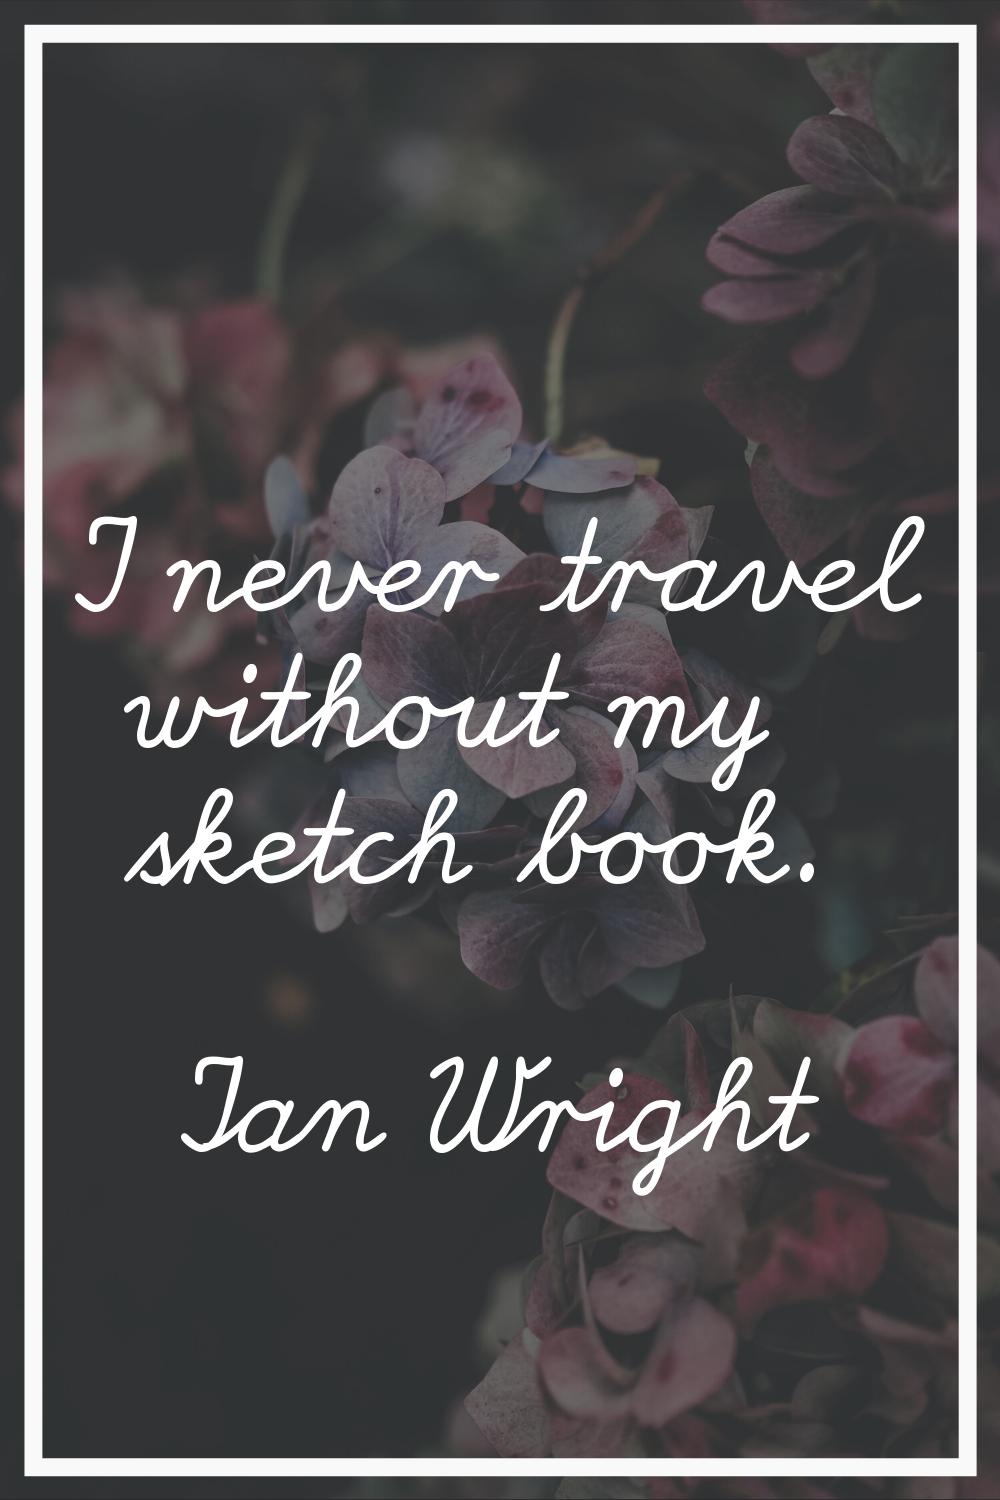 I never travel without my sketch book.